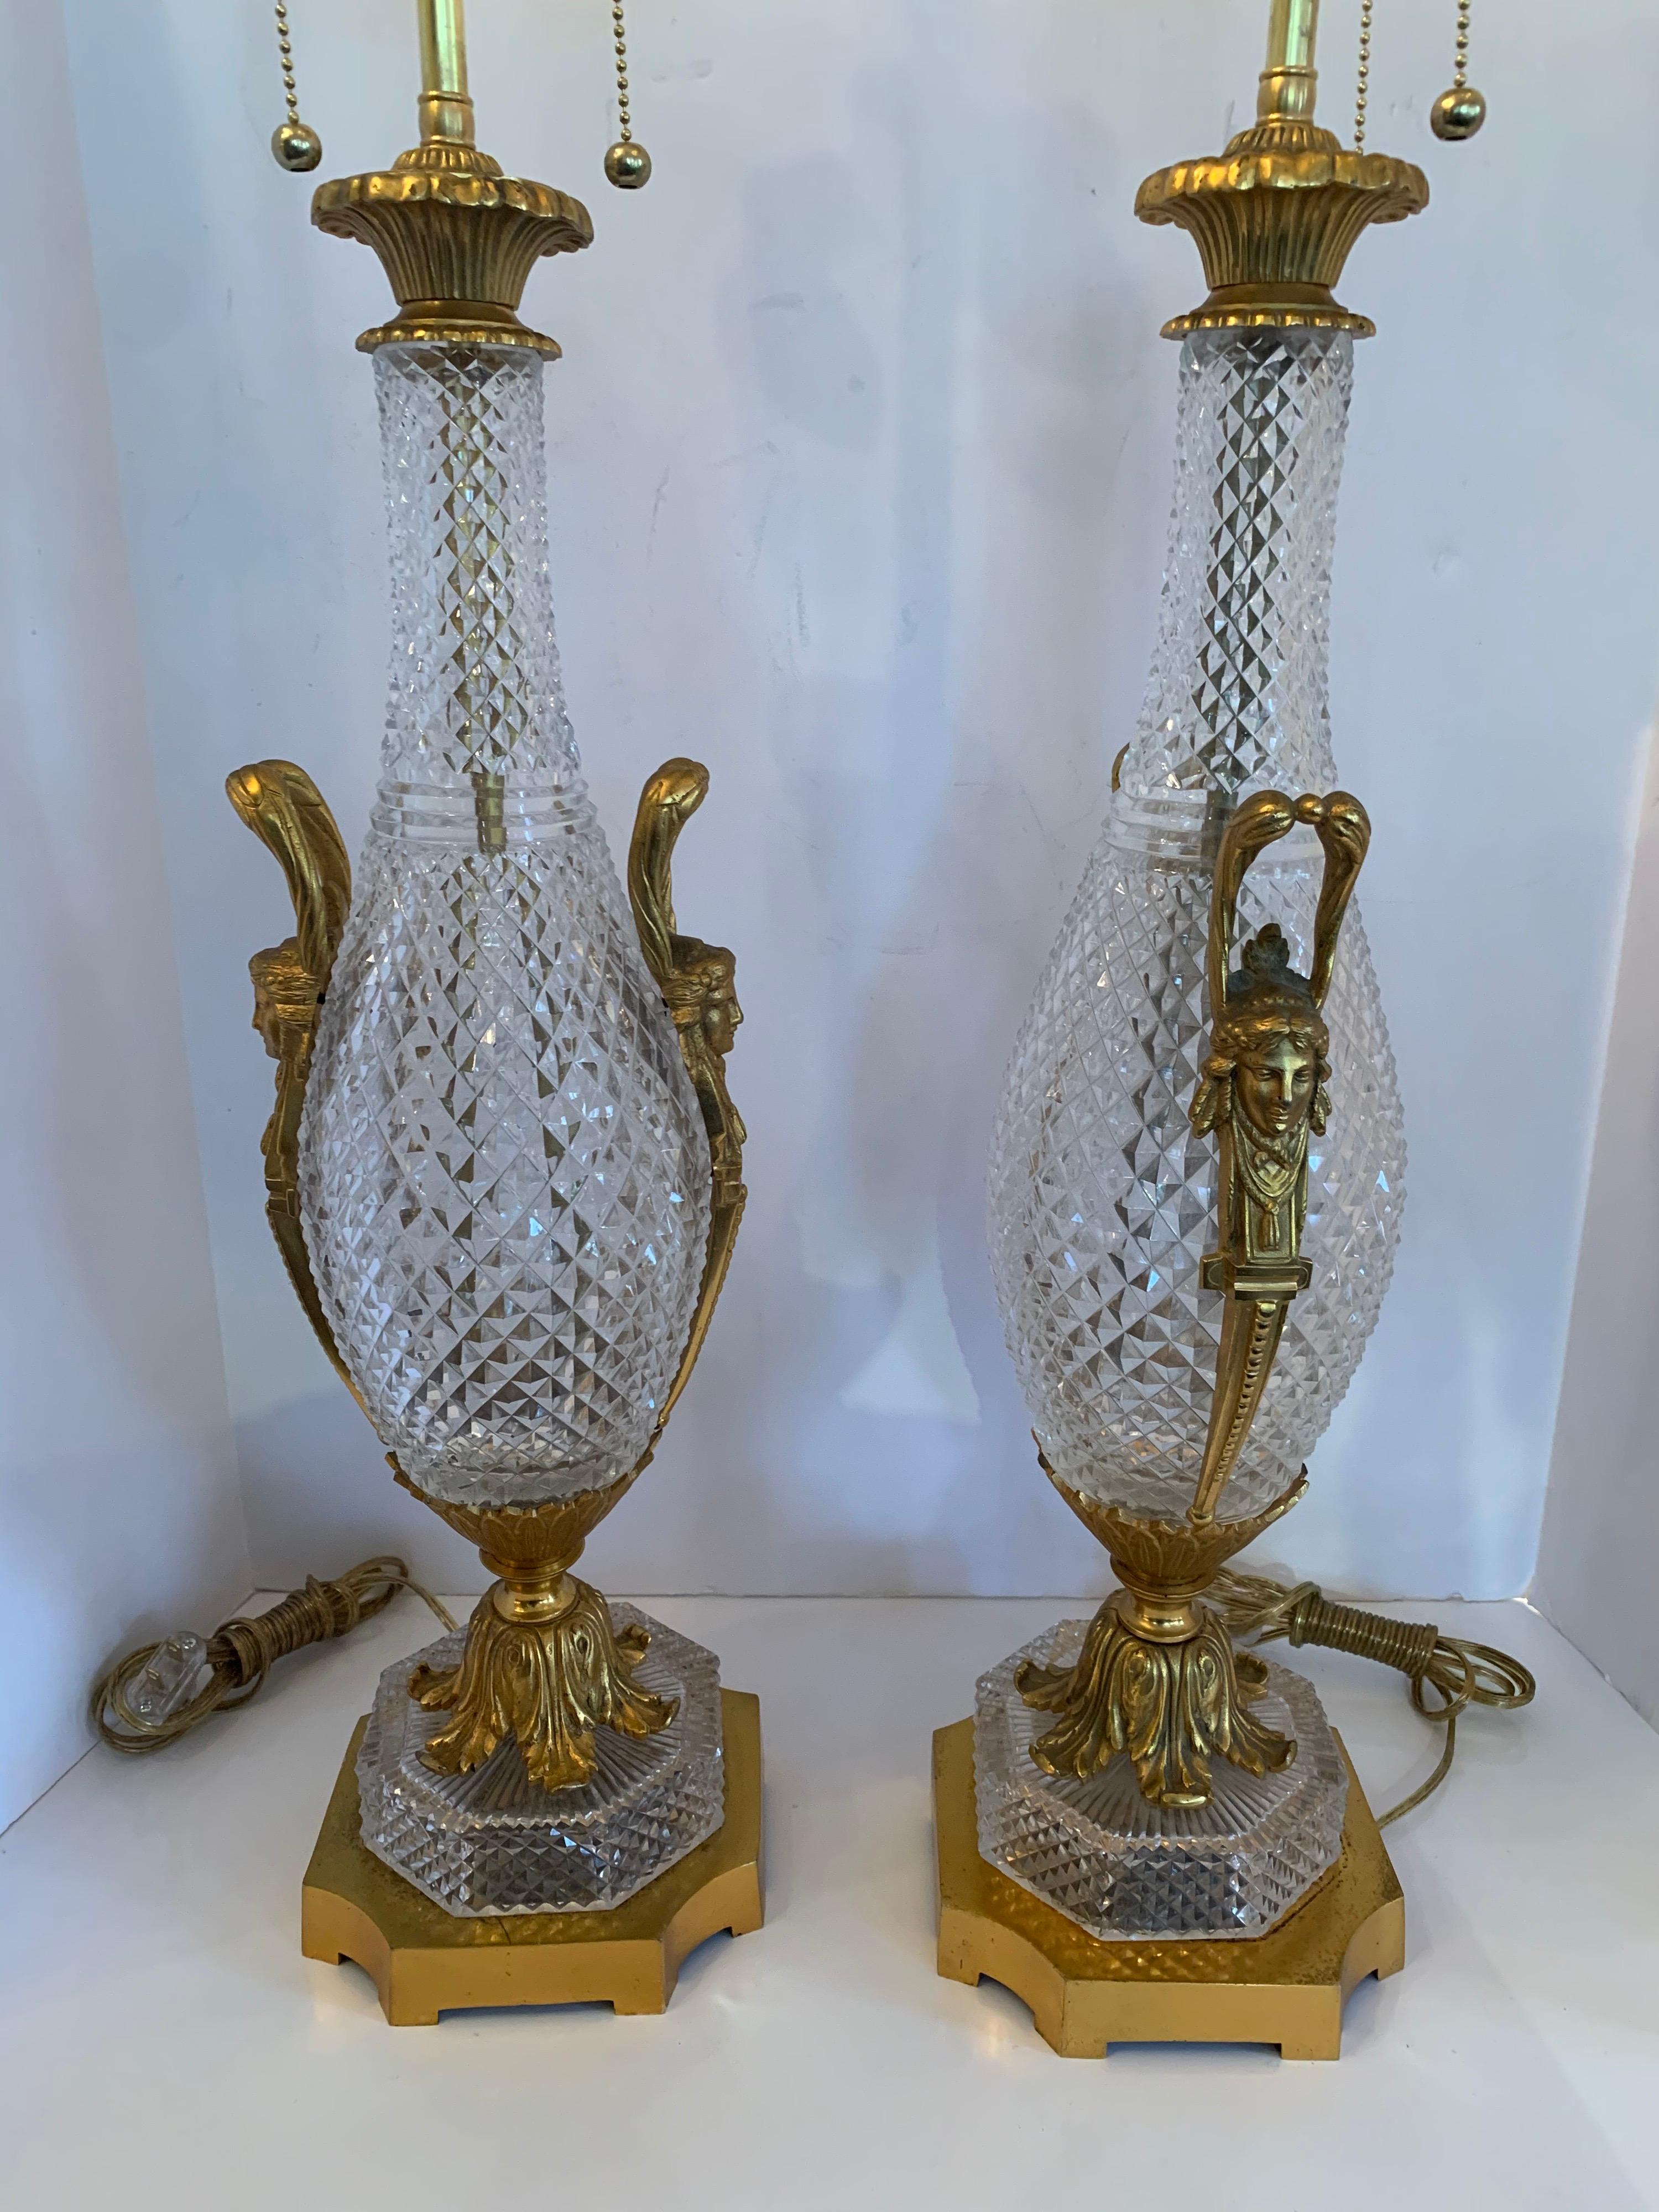 A wonderful pair of French gilt dore bronze & diamond cut crystal urn form lamps in the manner of baccarat.